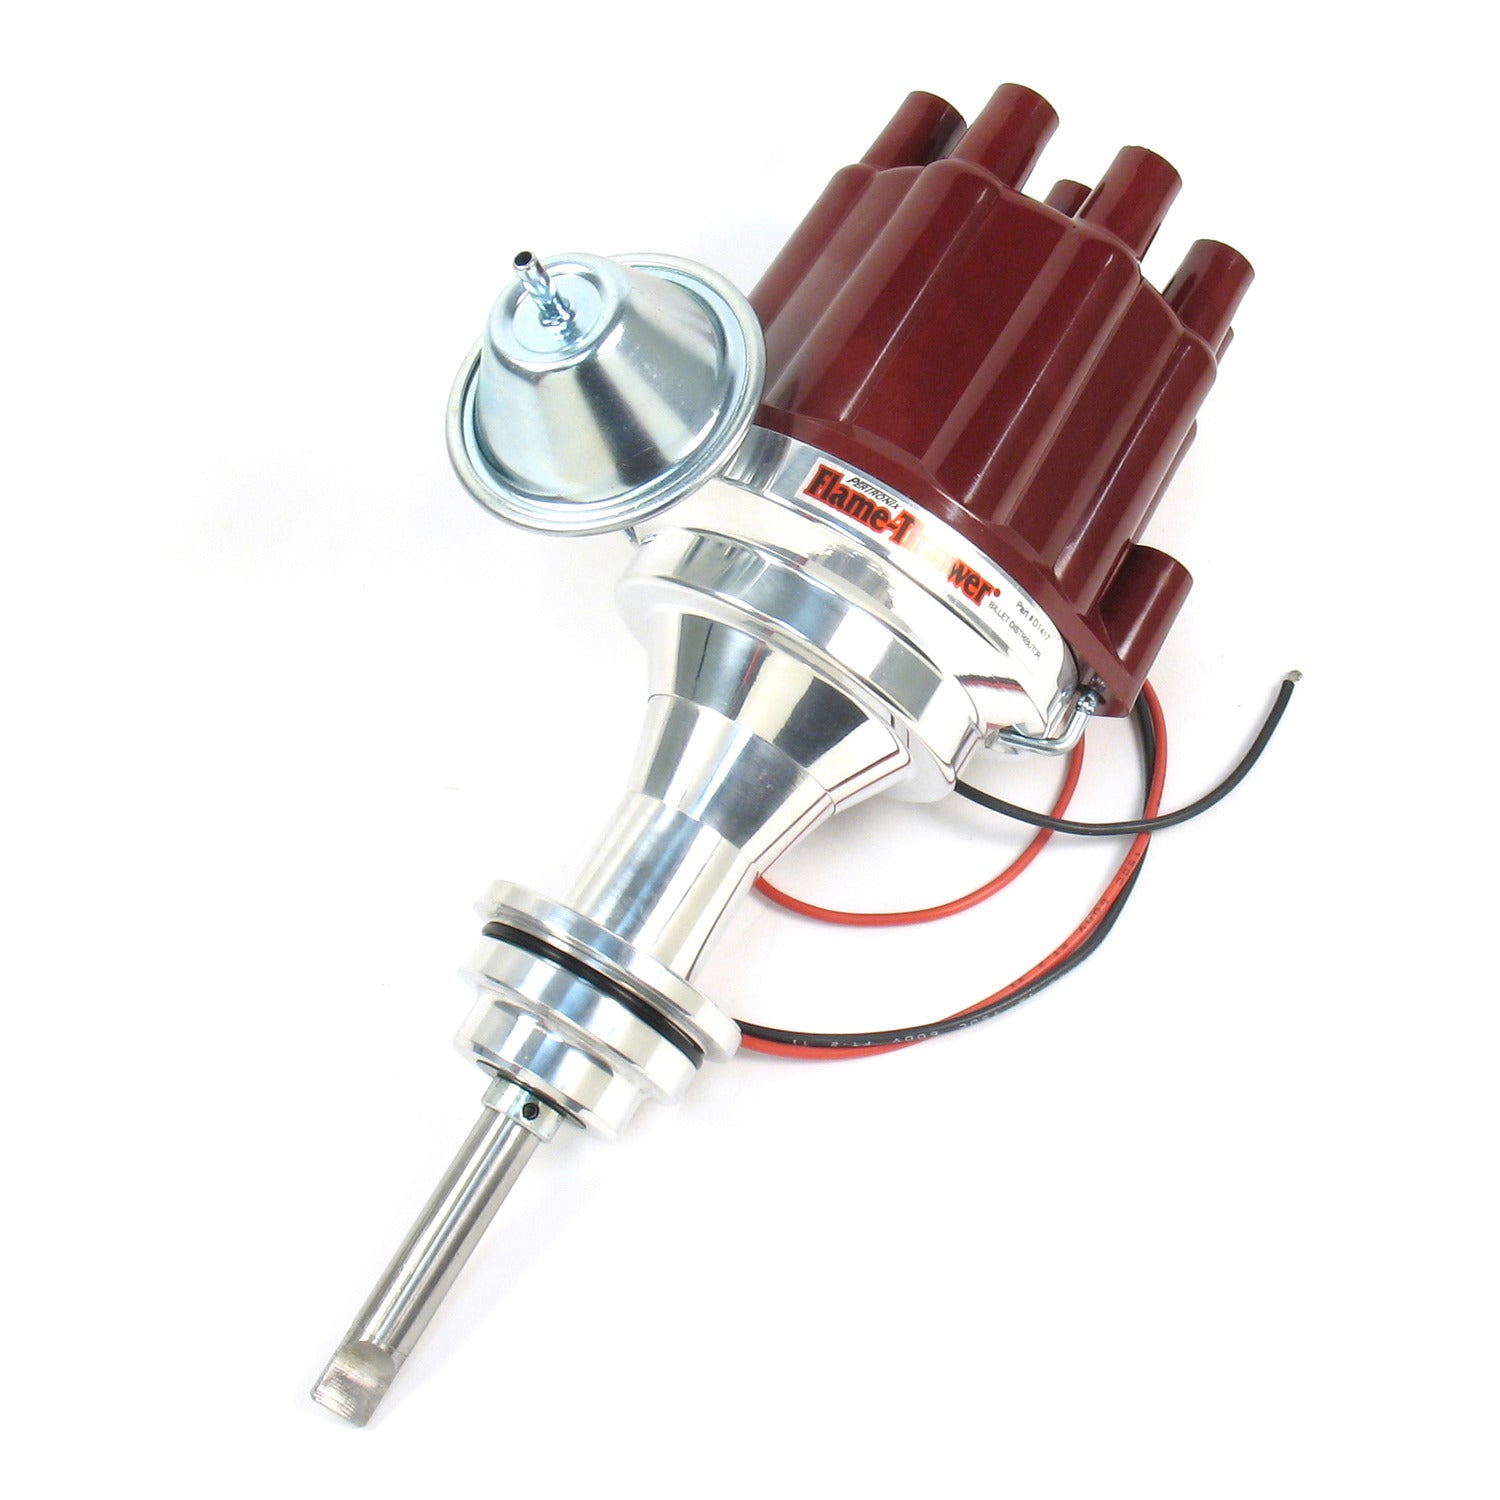 PerTronix D7141701 Flame-Thrower Electronic Distributor Billet Chrysler/Dodge/Plymouth 273-360 with Ignitor III Vacuum Advance Red Cap